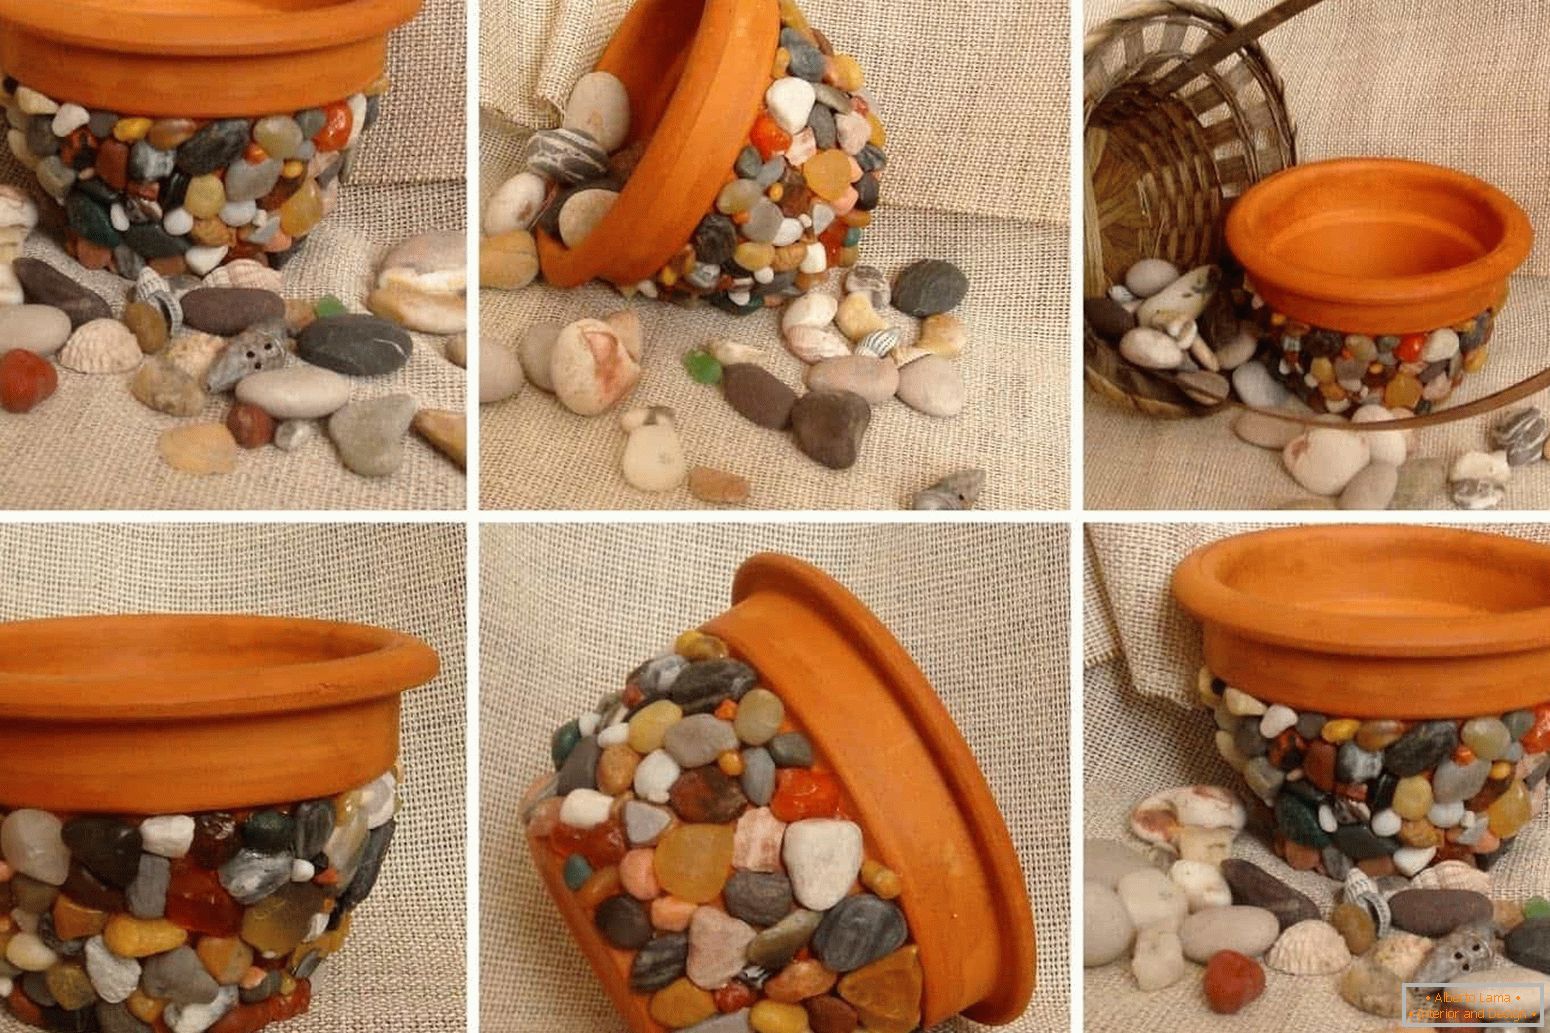 Clay flower pot in pebbles